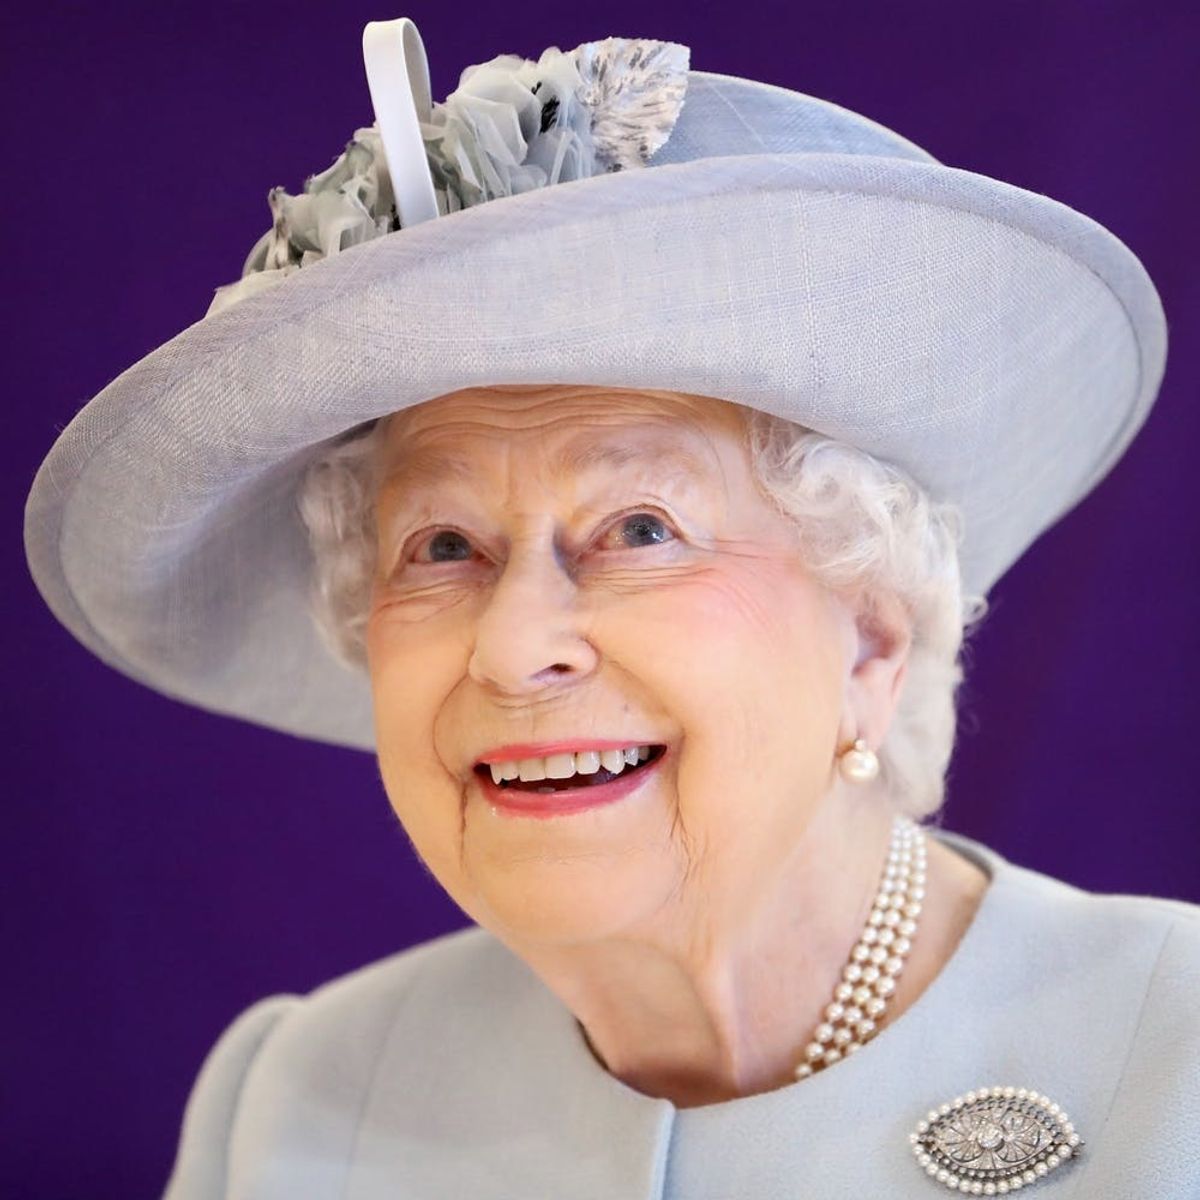 Queen Elizabeth II Will Celebrate Her 92nd Birthday With a Star-Studded Concert You Can Watch at Home